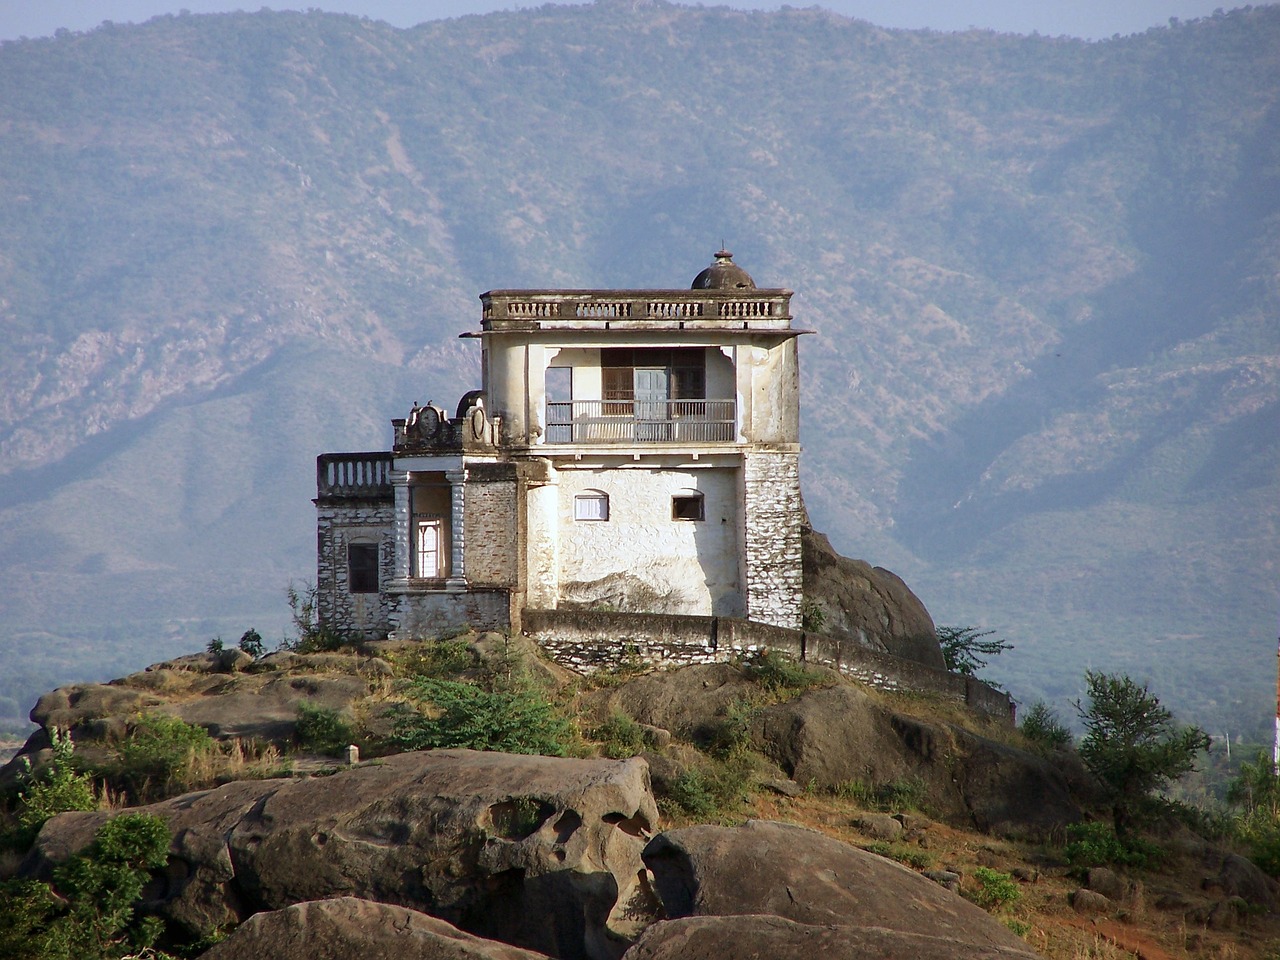 Mount Abu's Natural Wonders and Culinary Delights